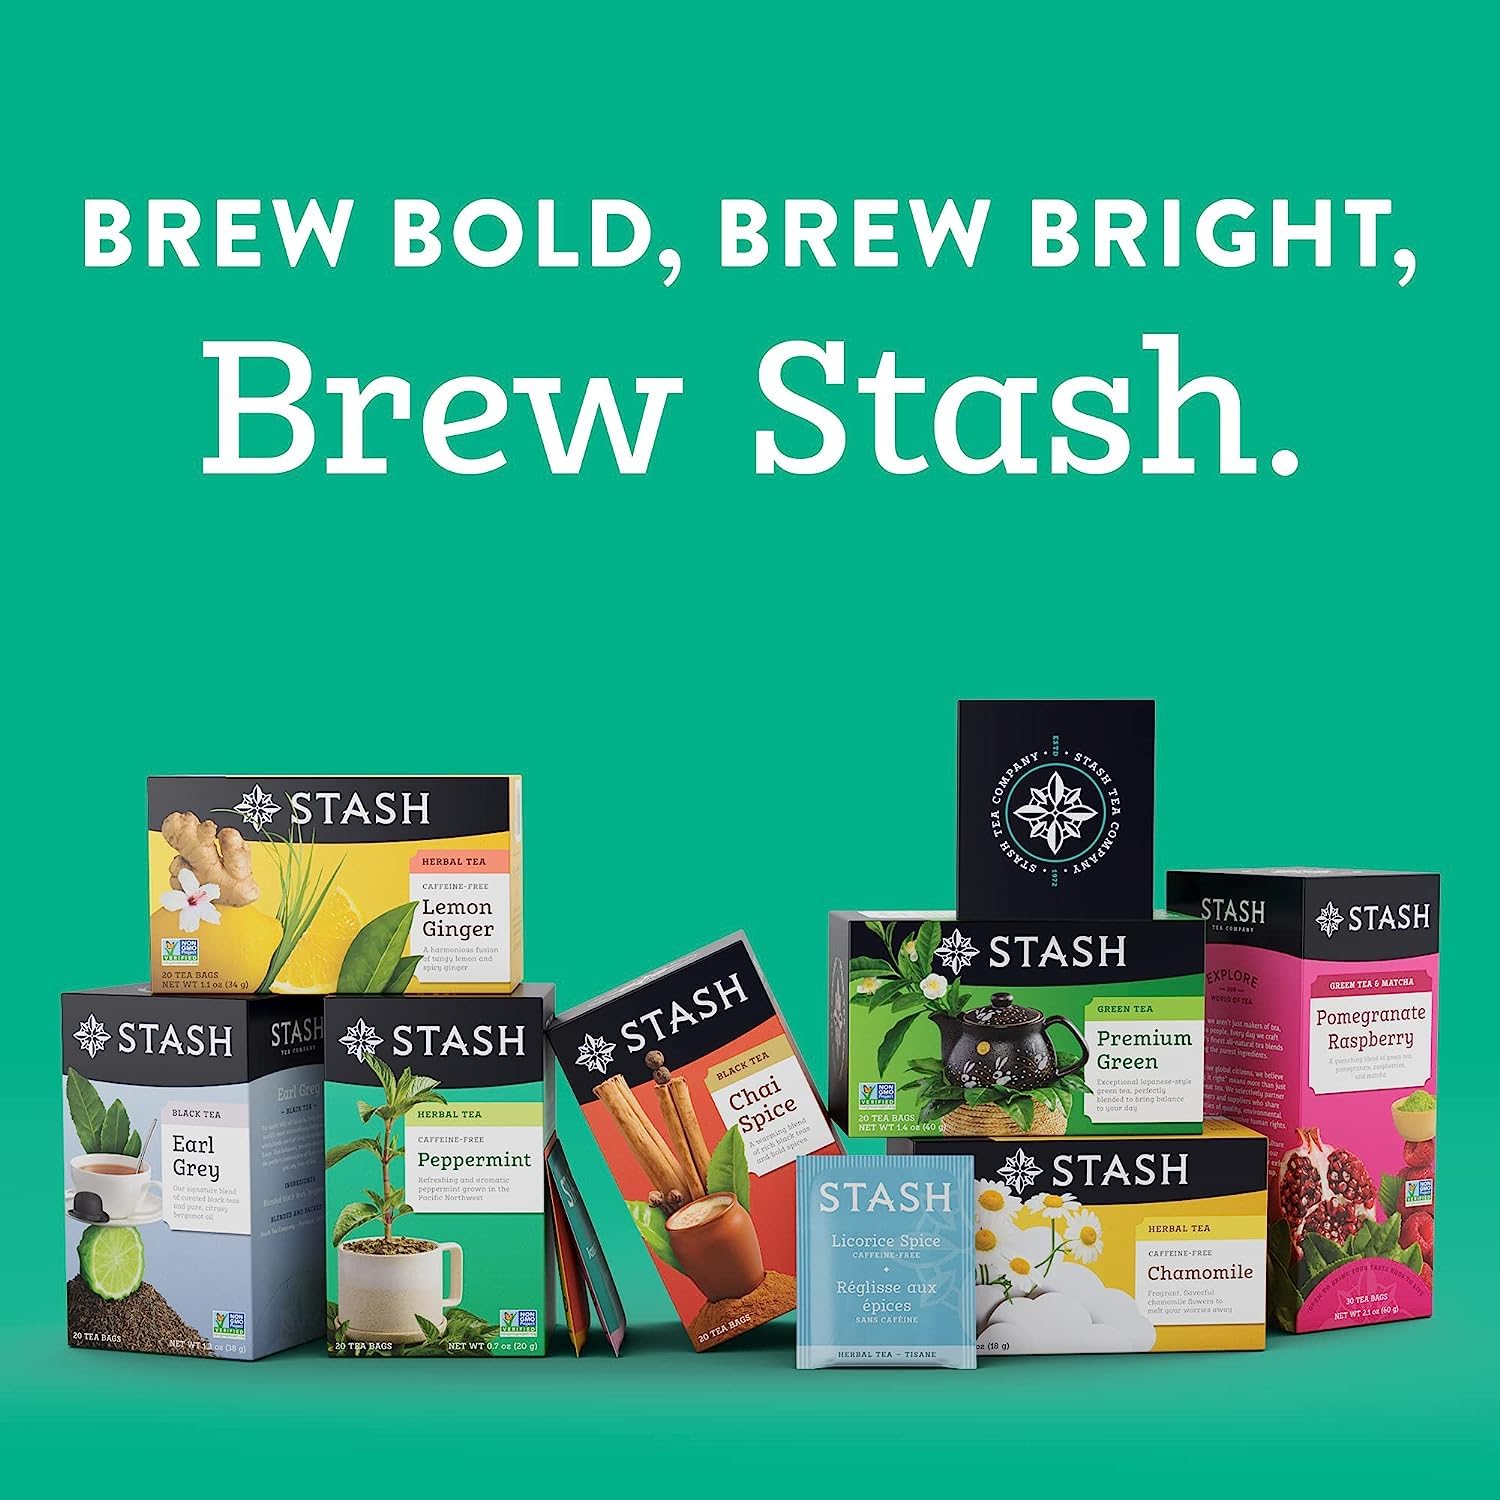 Wholesale prices with free shipping all over United States Stash Tea Fruity Herbal Tea 6 Flavor Tea Sampler, 6 boxes With 18-20 Tea Bags Each - Steven Deals